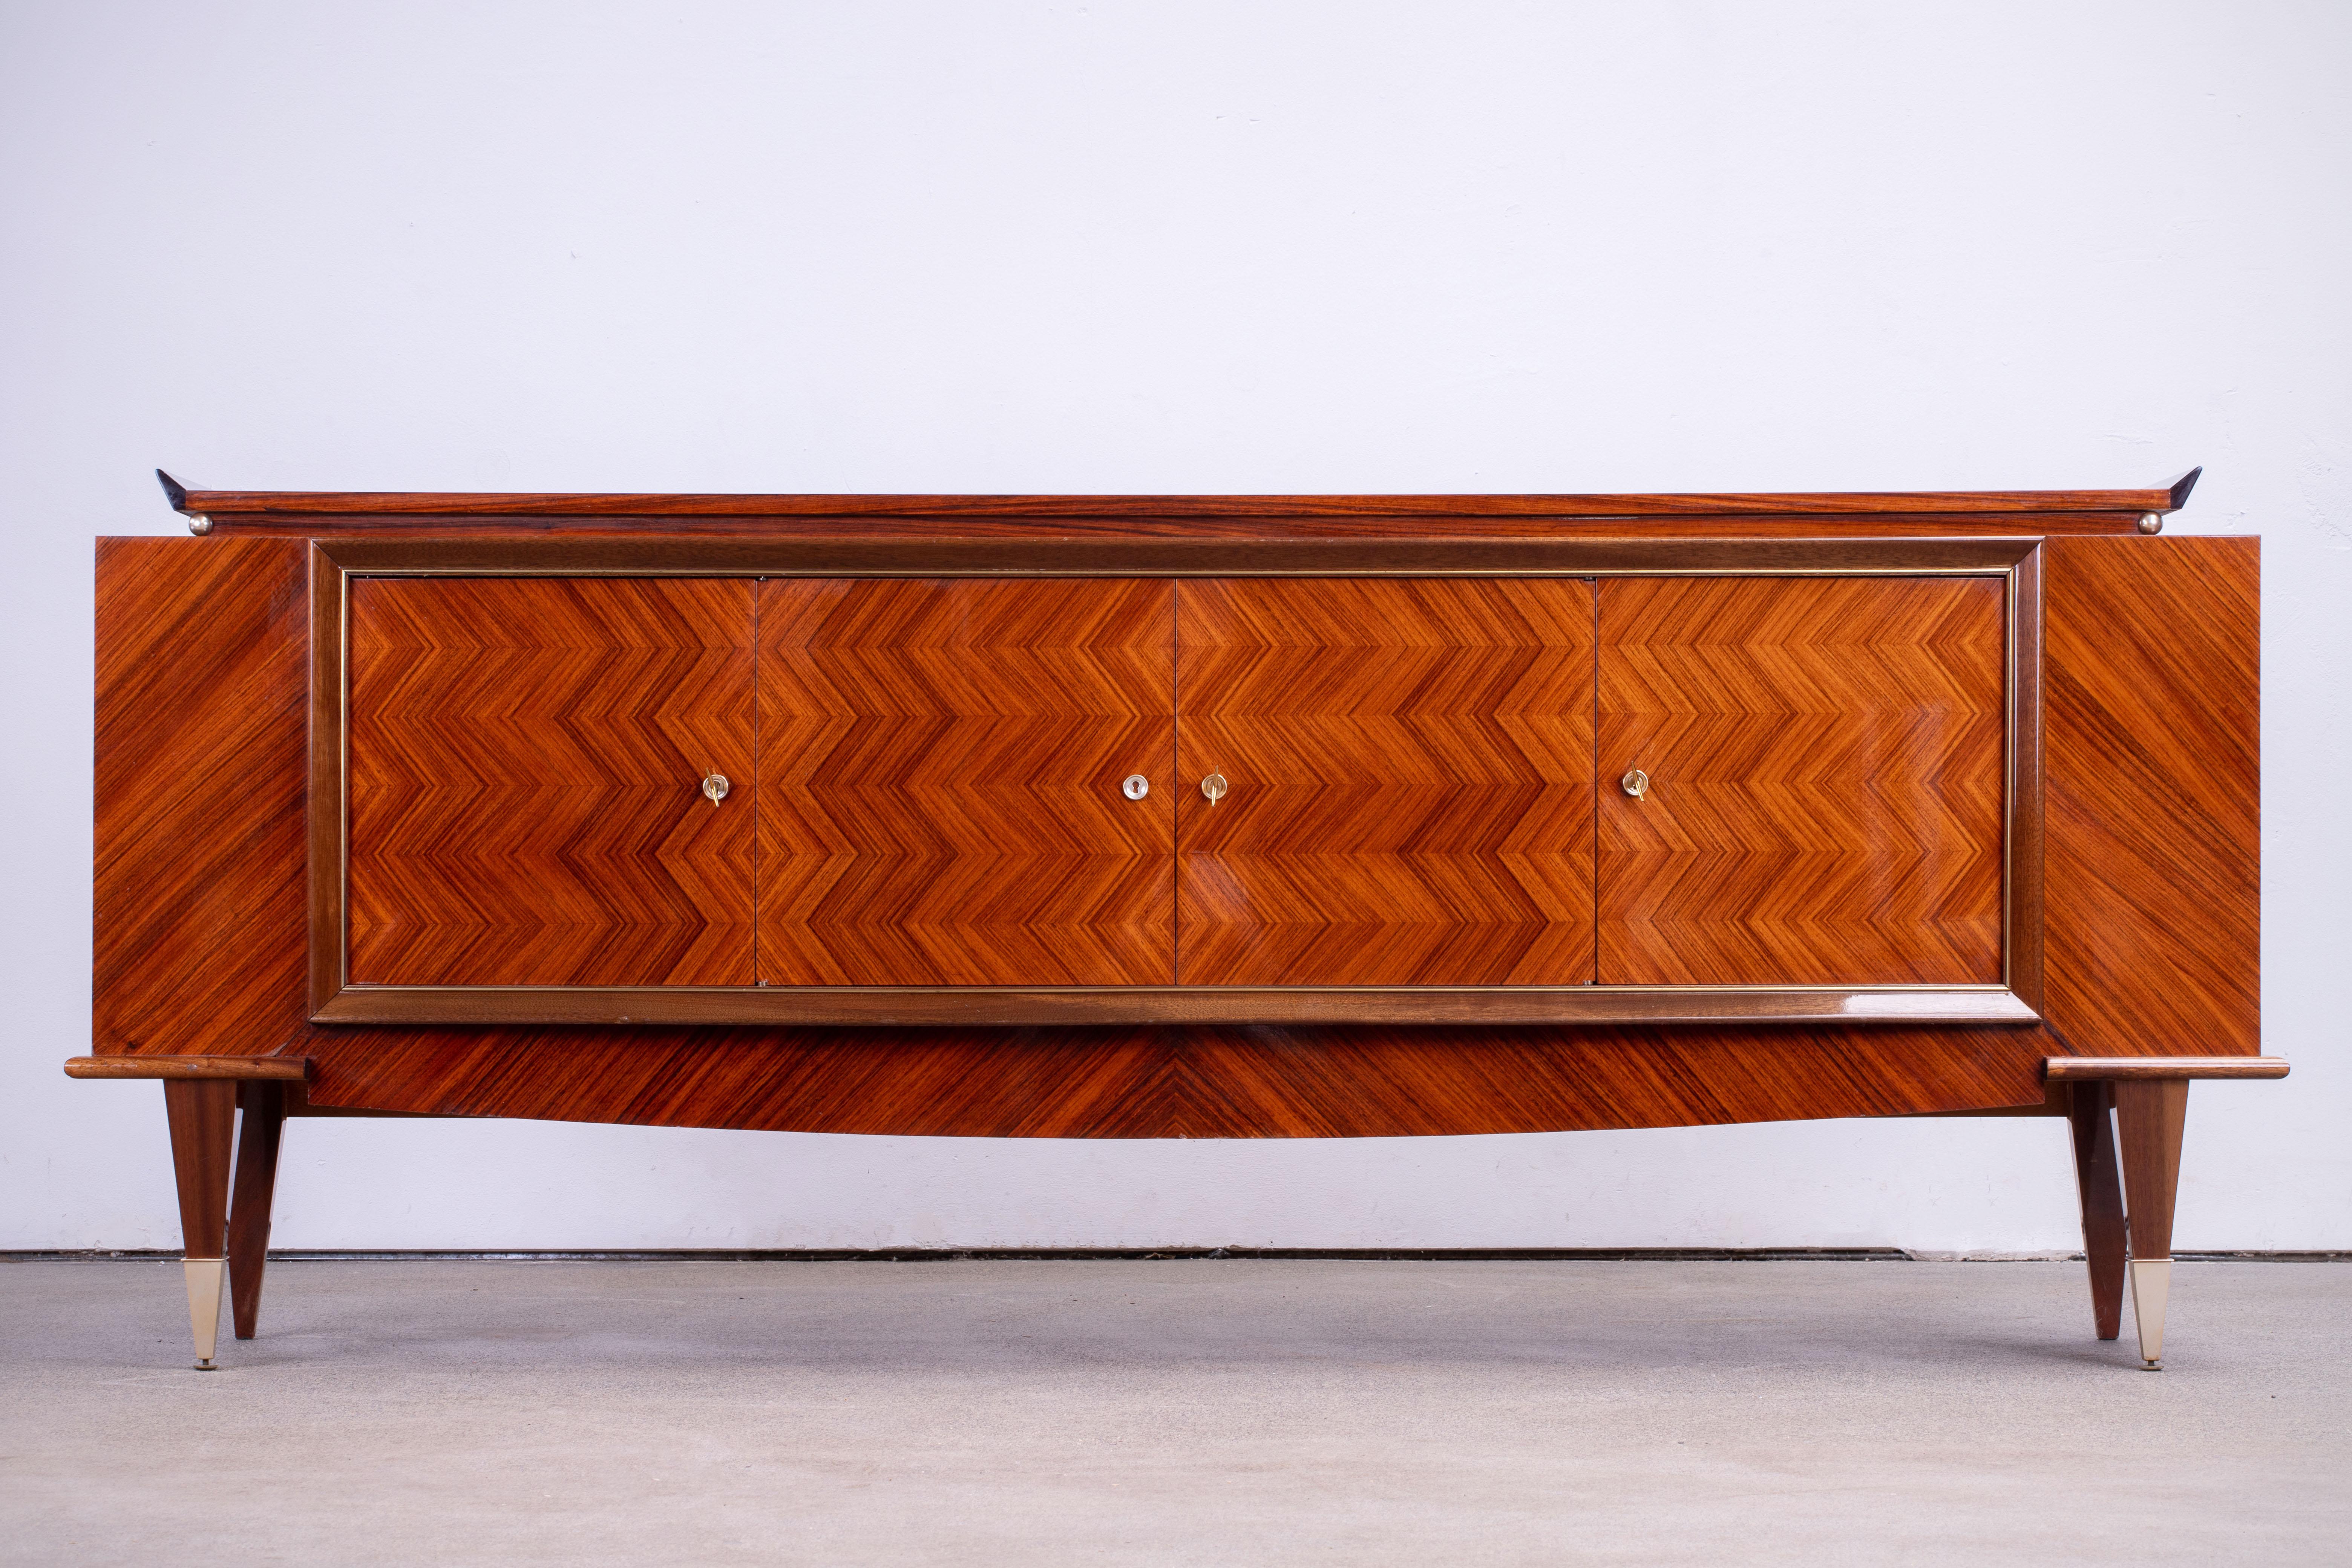 French Art Deco sideboard, credenza, with bar cabinet. The sideboard features stunning Macassar ebony wood grain. It offers ample storage, with shelve behind two double doors with a colonne of drawers on the right. 
Both sides of the cabinet lock,